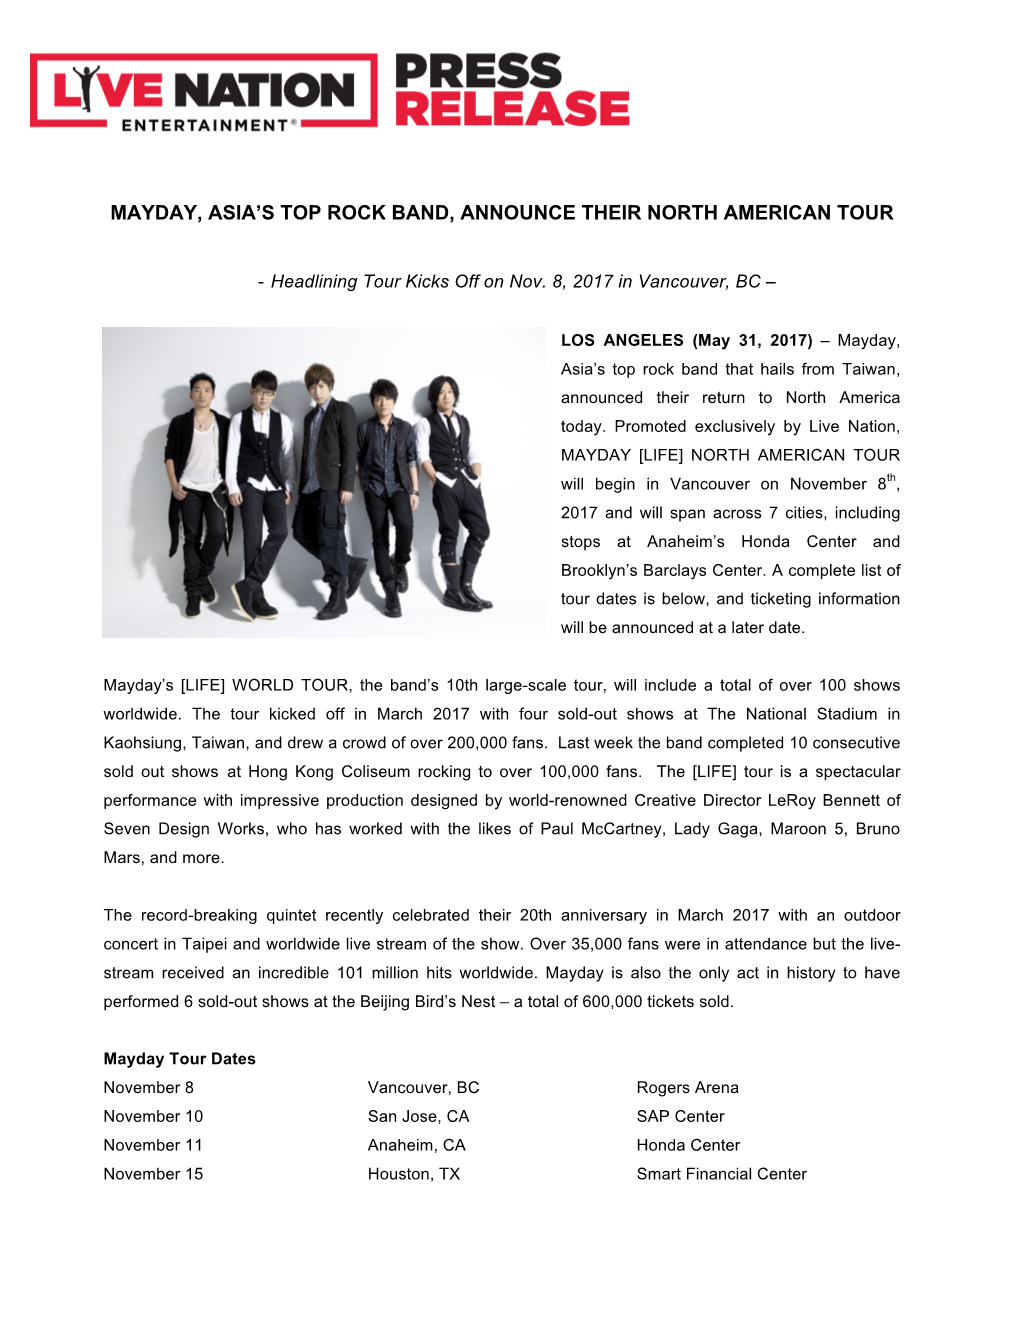 Mayday, Asia's Top Rock Band, Announce Their North